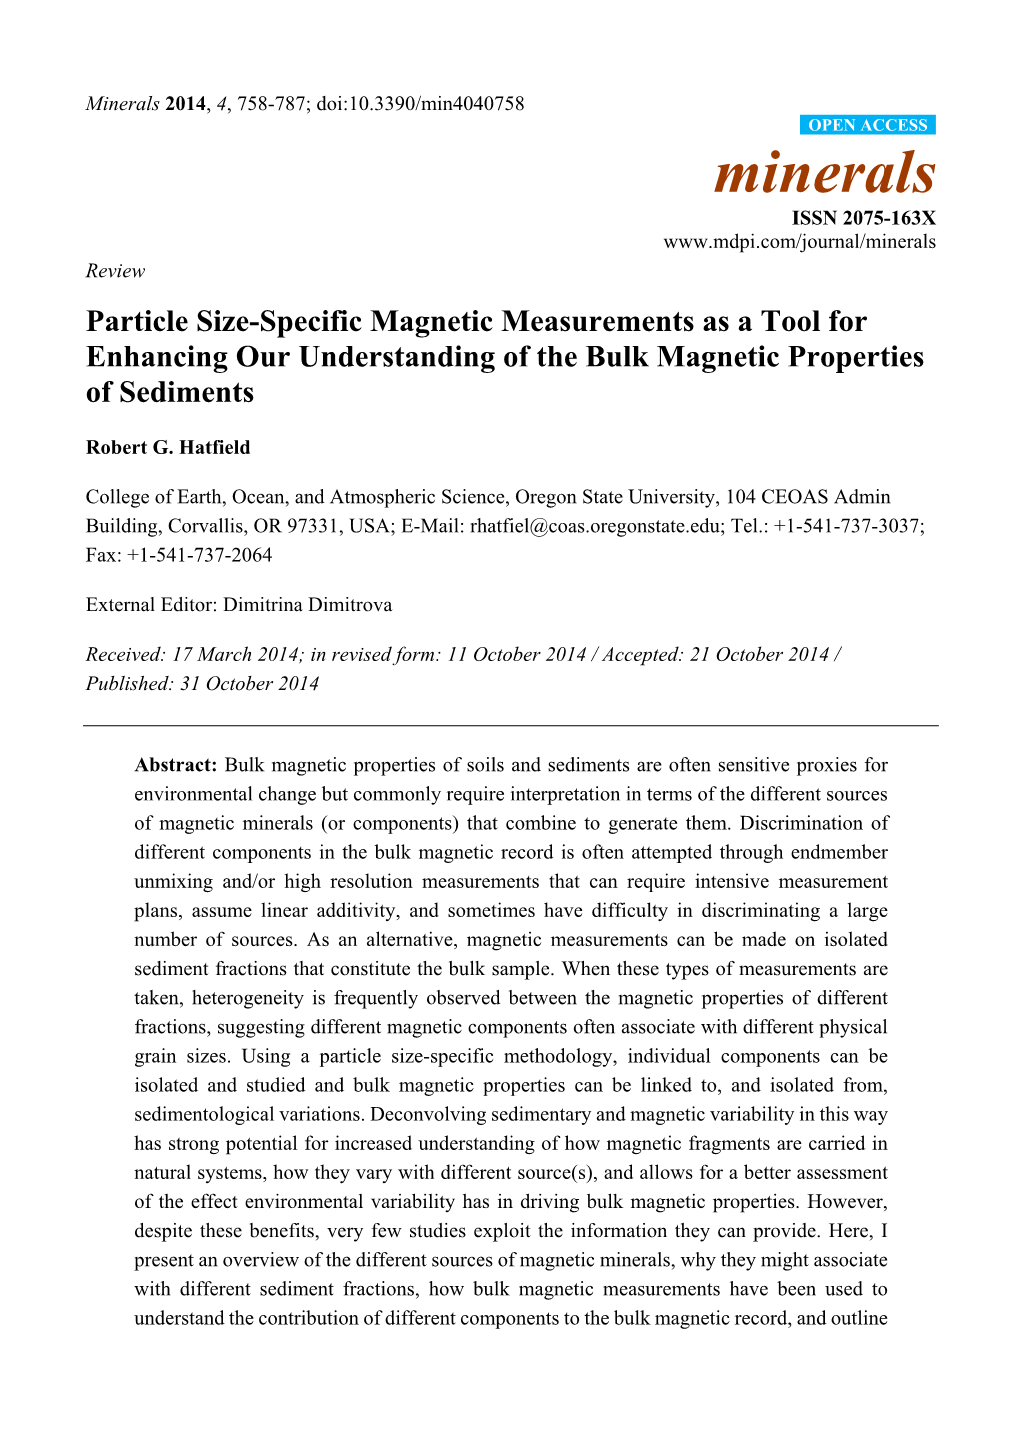 Particle Size-Specific Magnetic Measurements As a Tool for Enhancing Our Understanding of the Bulk Magnetic Properties of Sediments